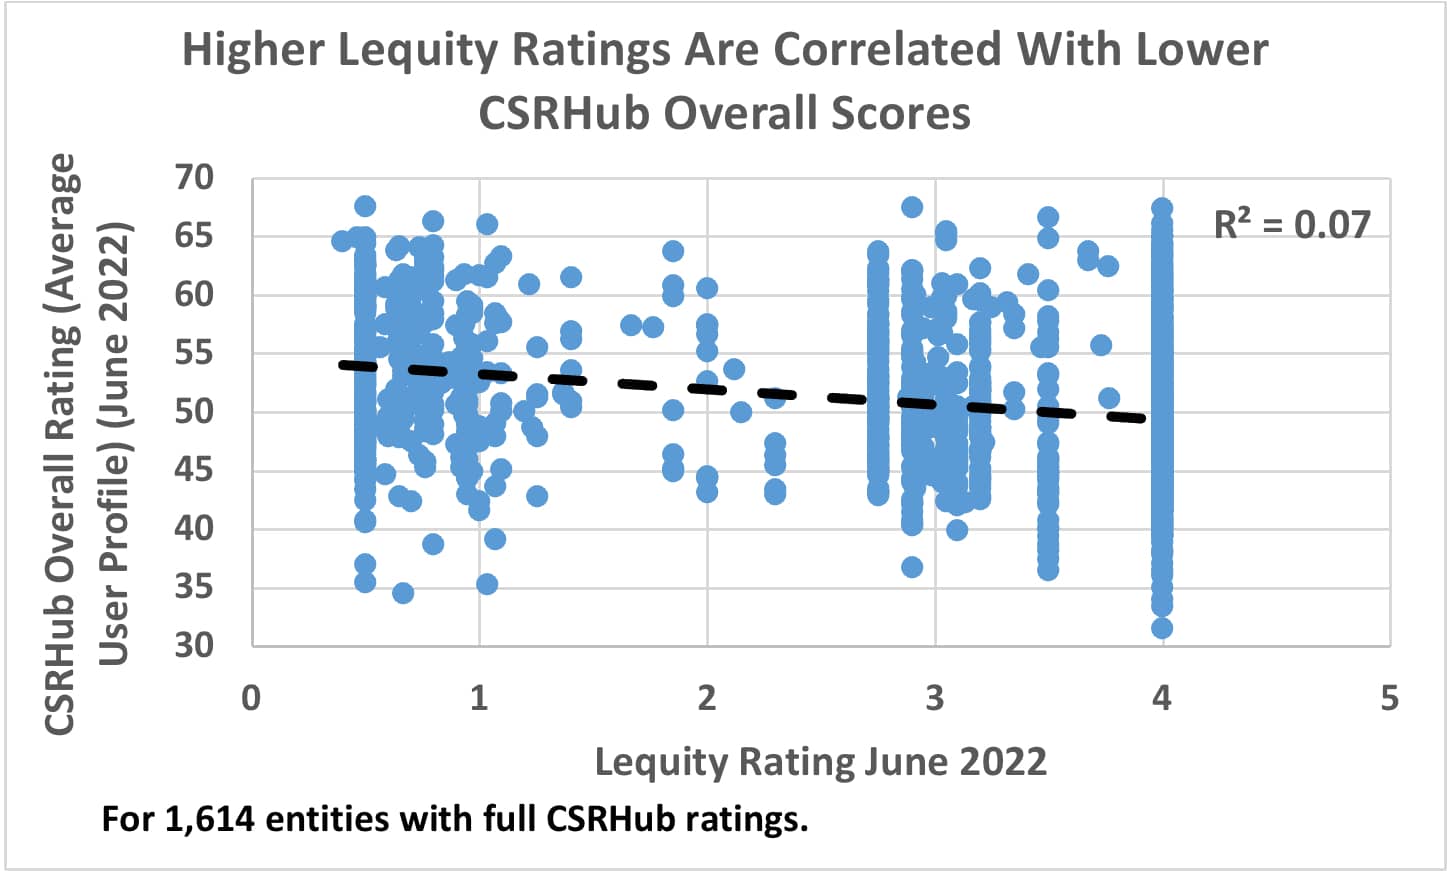 Higher Lequity Ratings Correlated with Lower CSRHub Ratings